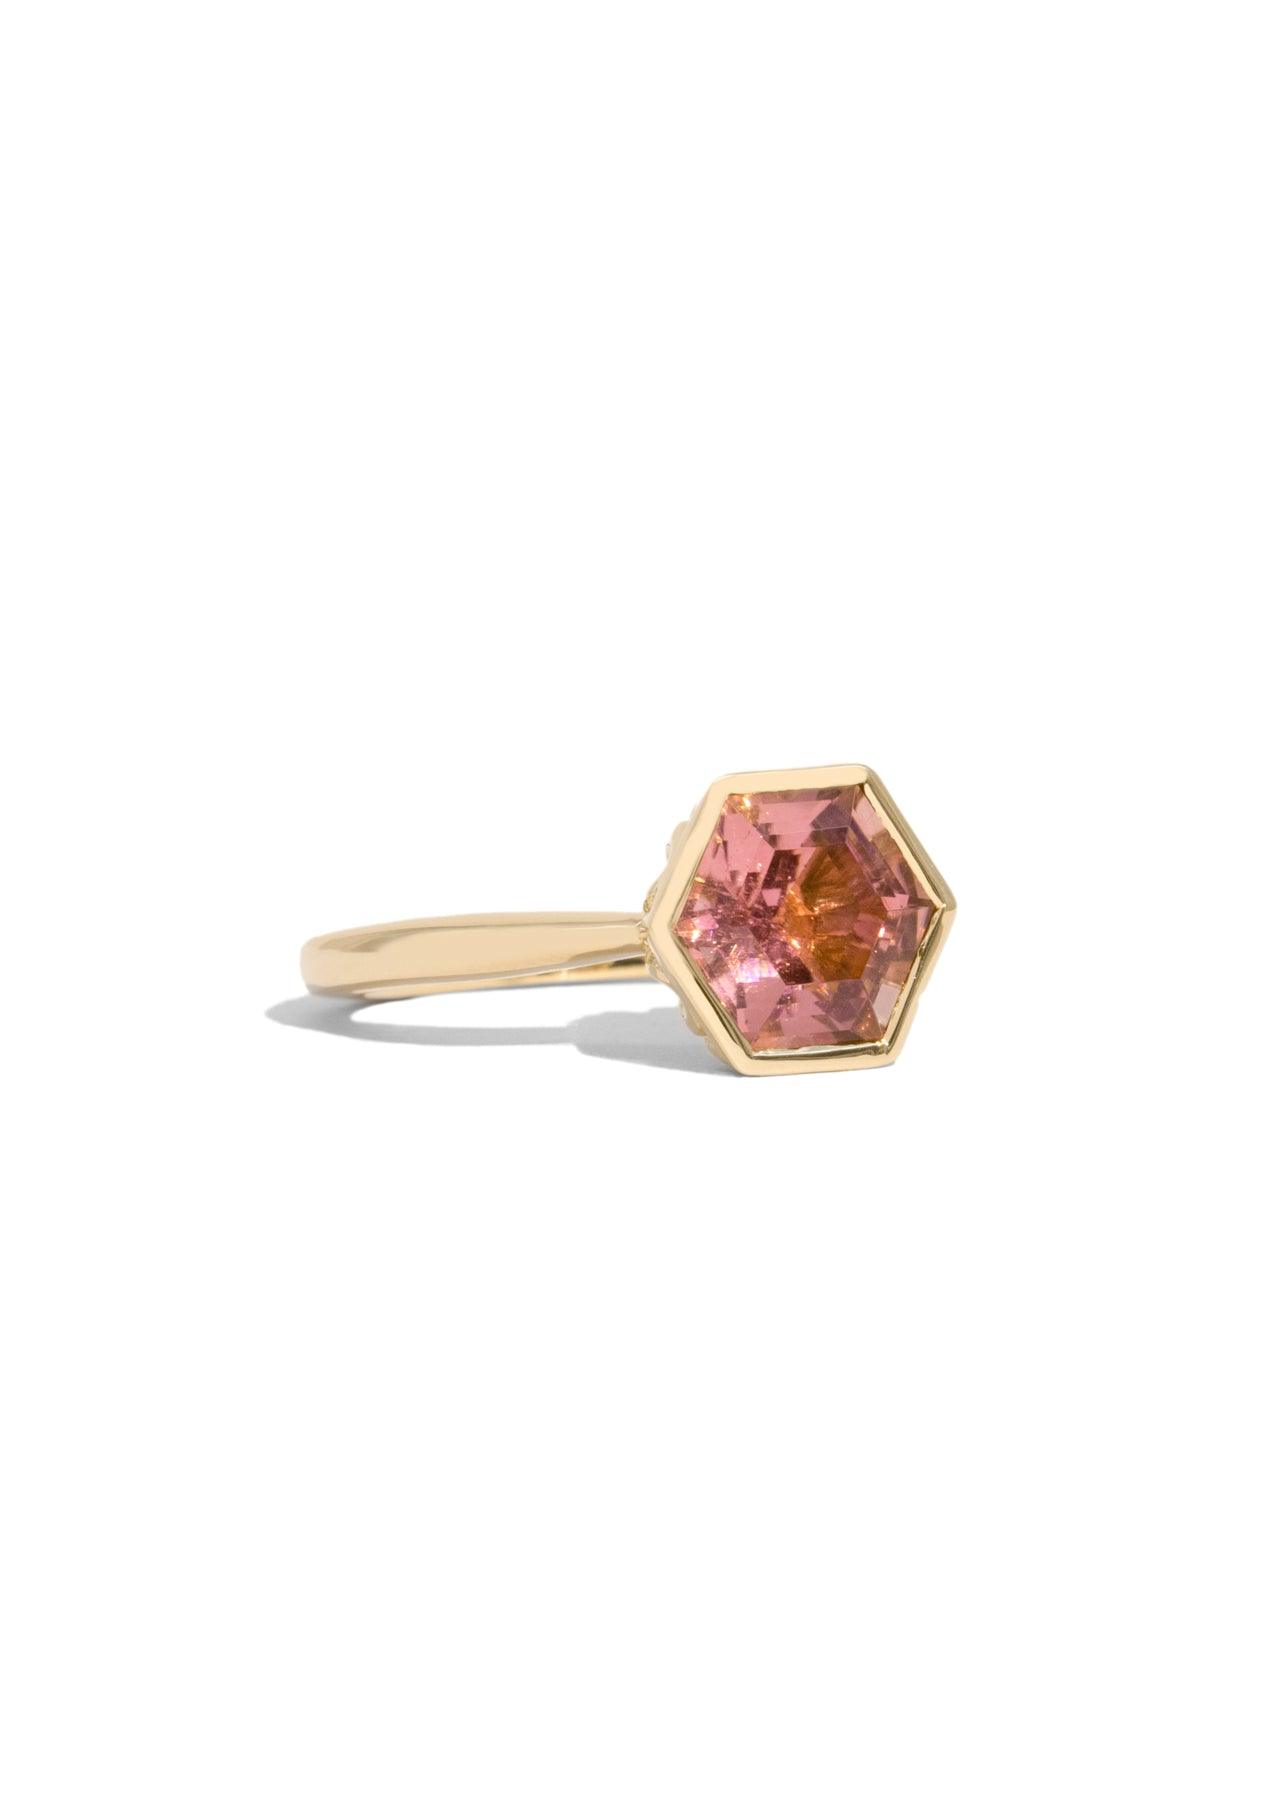 The Isabel 2.52ct Peach Tourmaline Ring